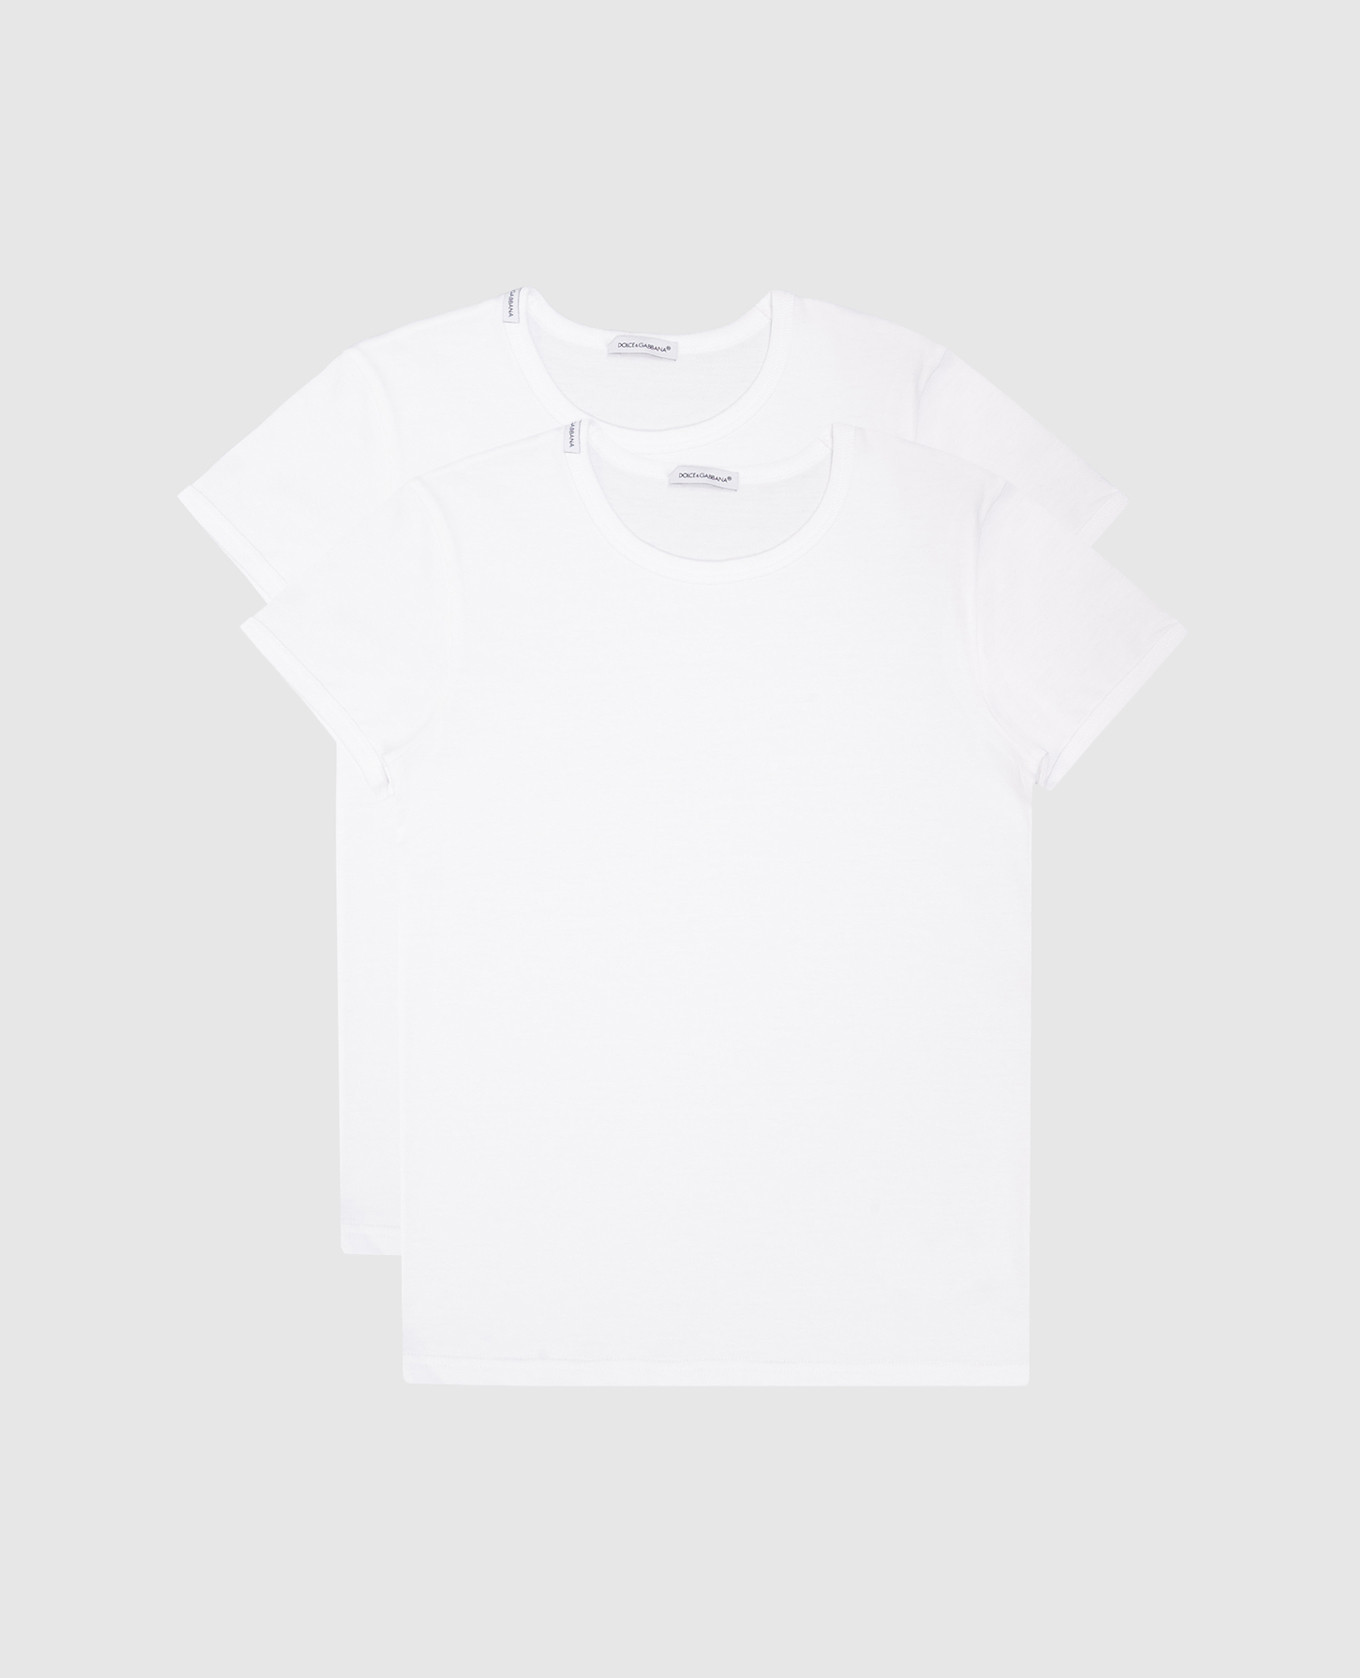 Children's set of white t-shirts with a logo